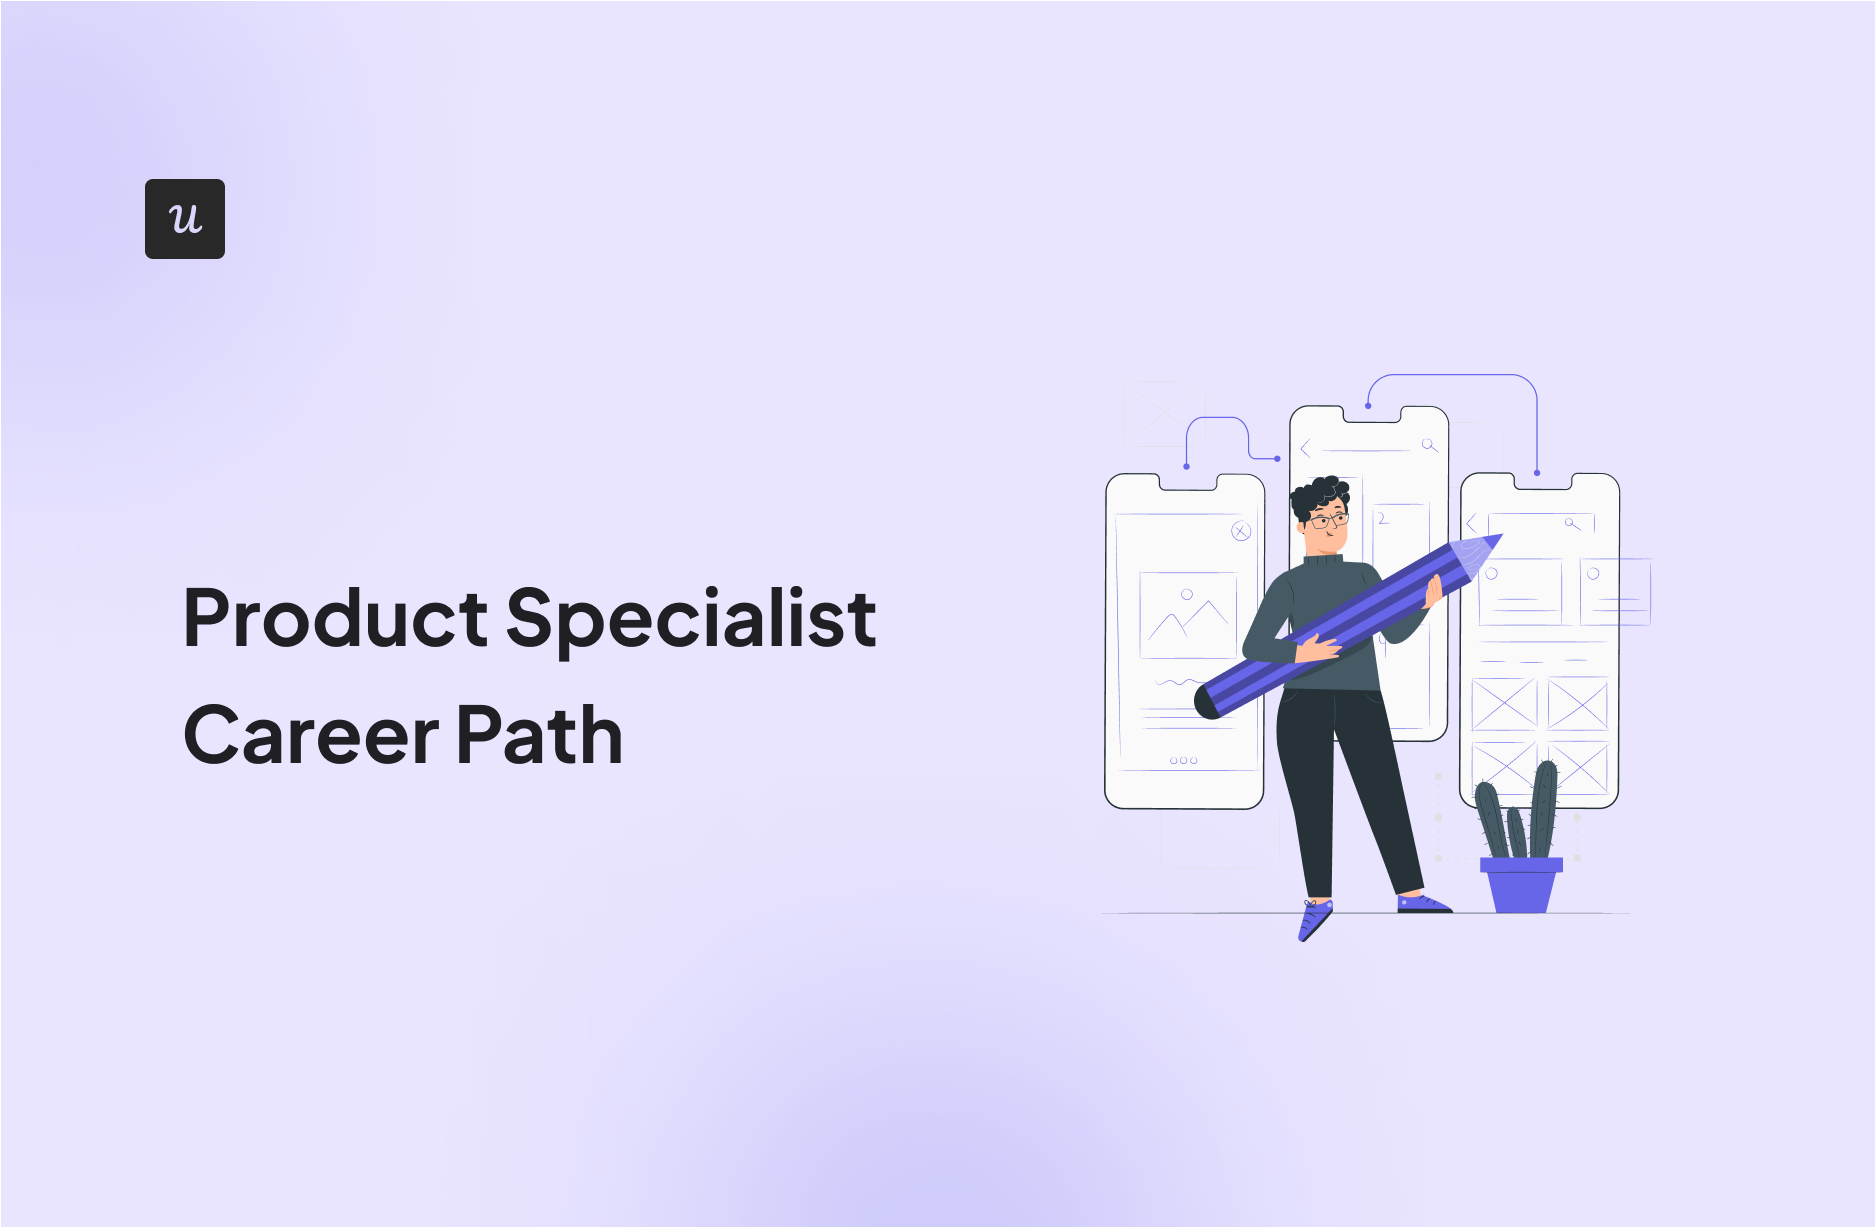 Product Specialist Career Path